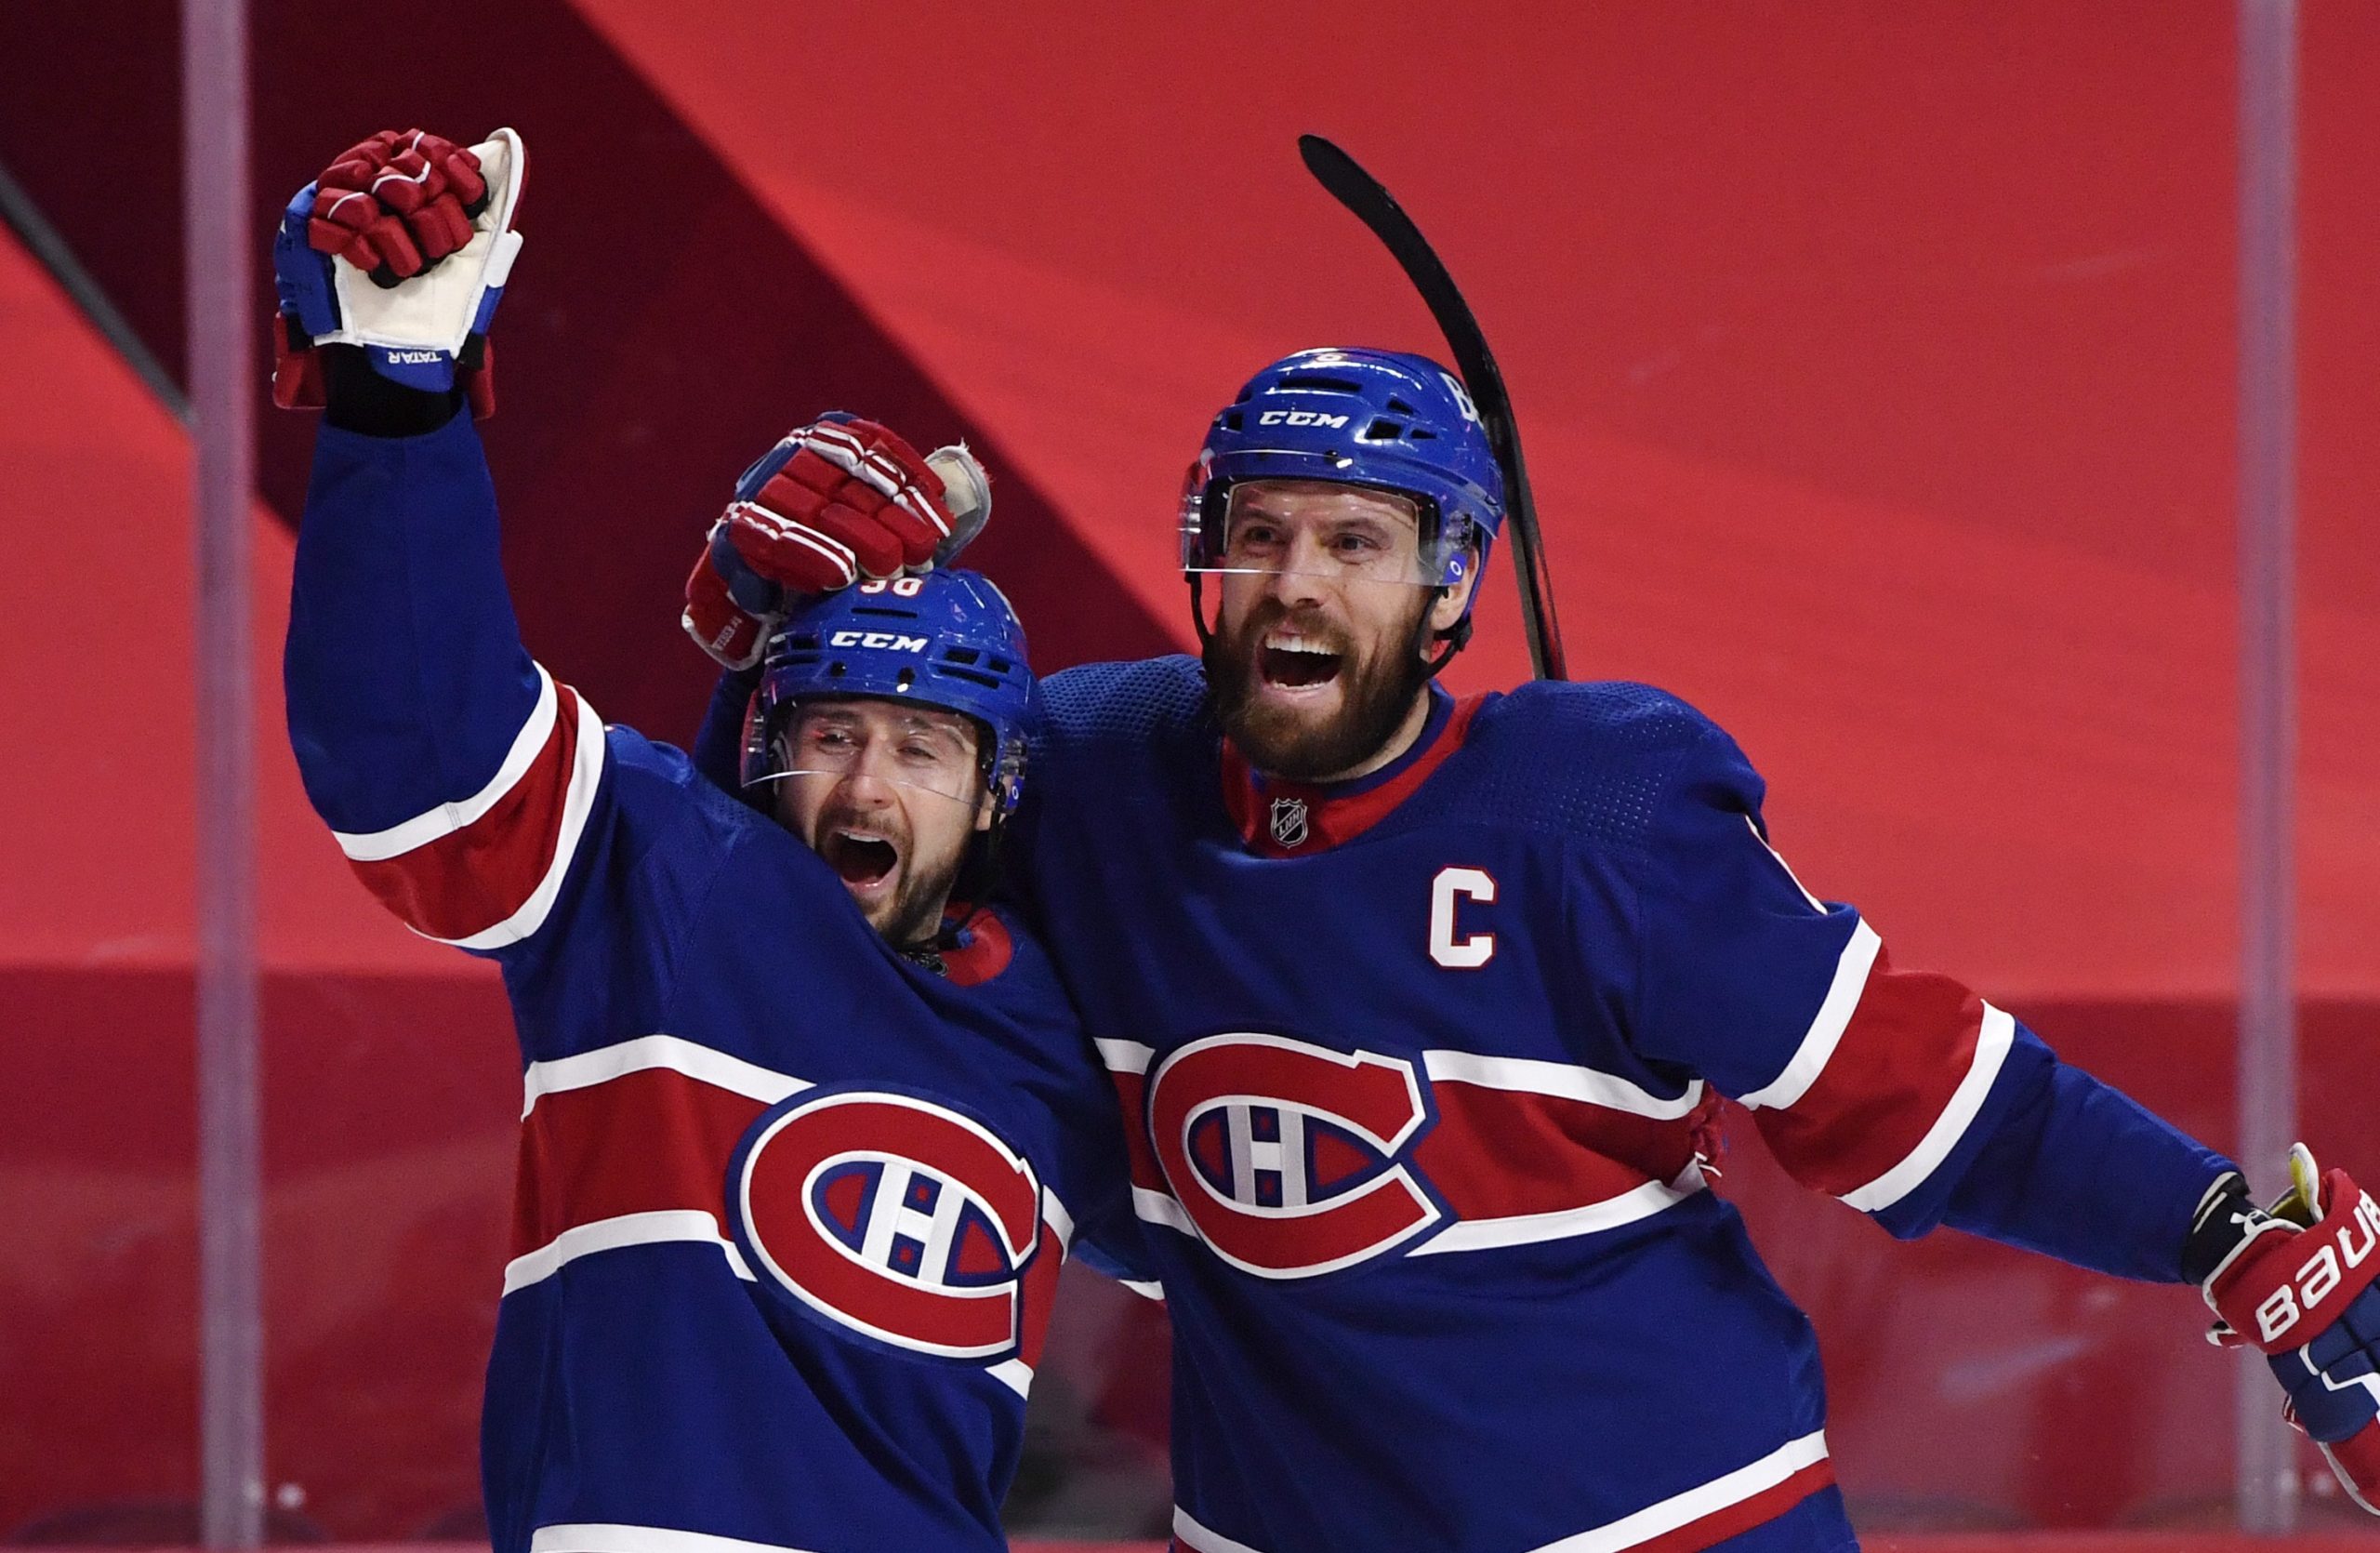 Montreal Canadiens forward Tomas Tatar reacts with teammate defenseman Shea Weber after scoring a goal